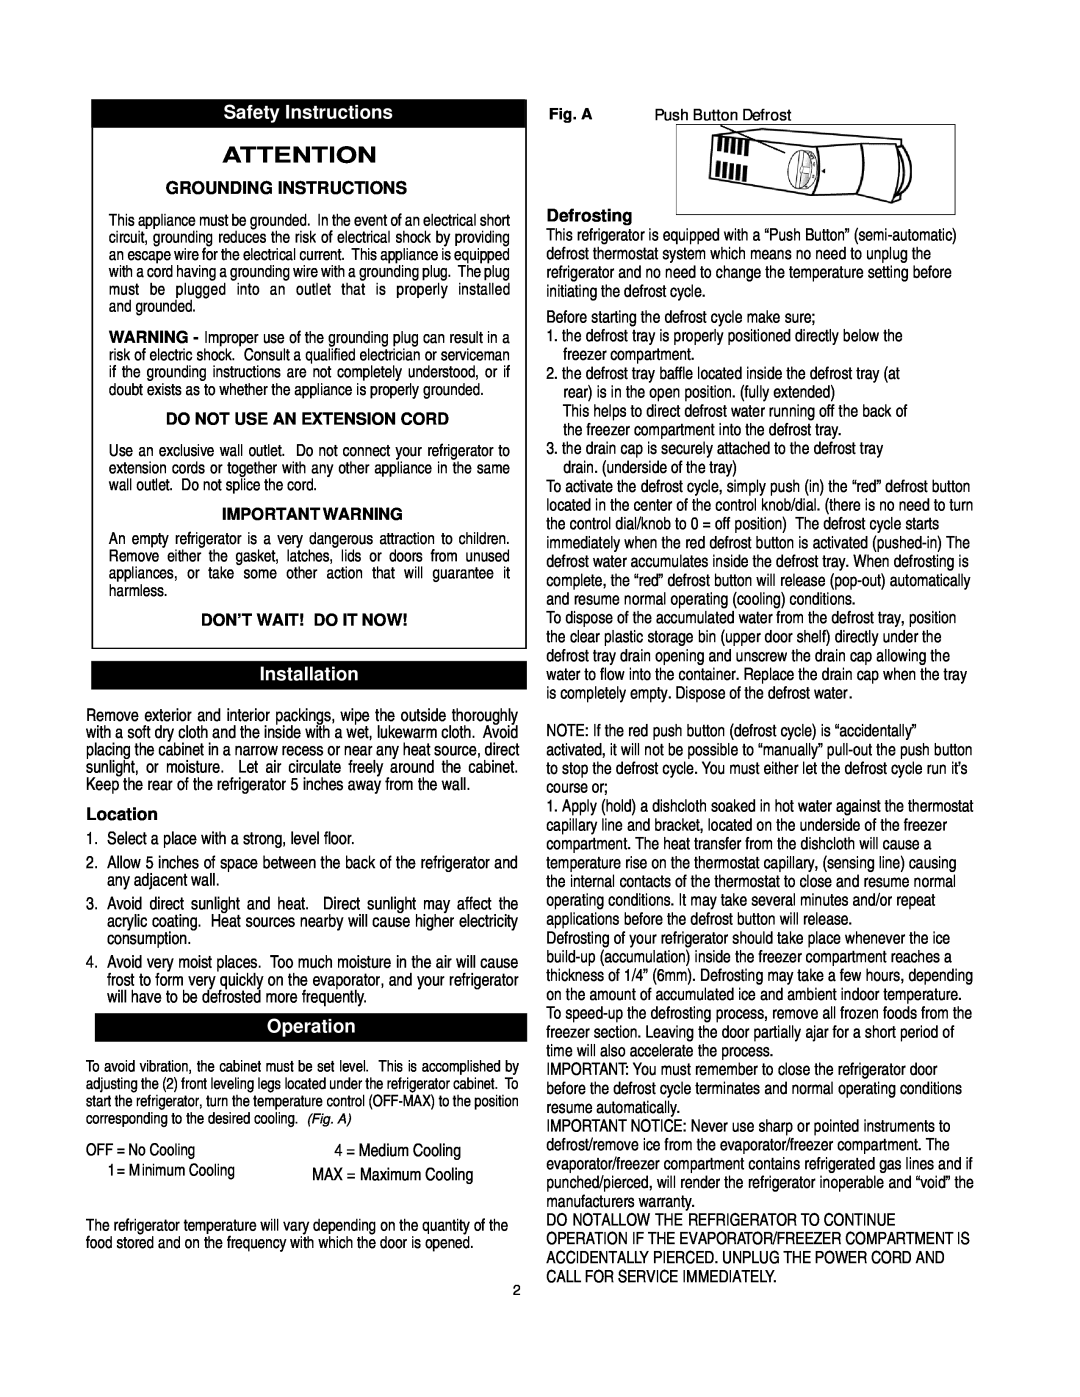 Danby D1052W manual Safety Instructions, Installation, Operation, Grounding Instructions, Location 